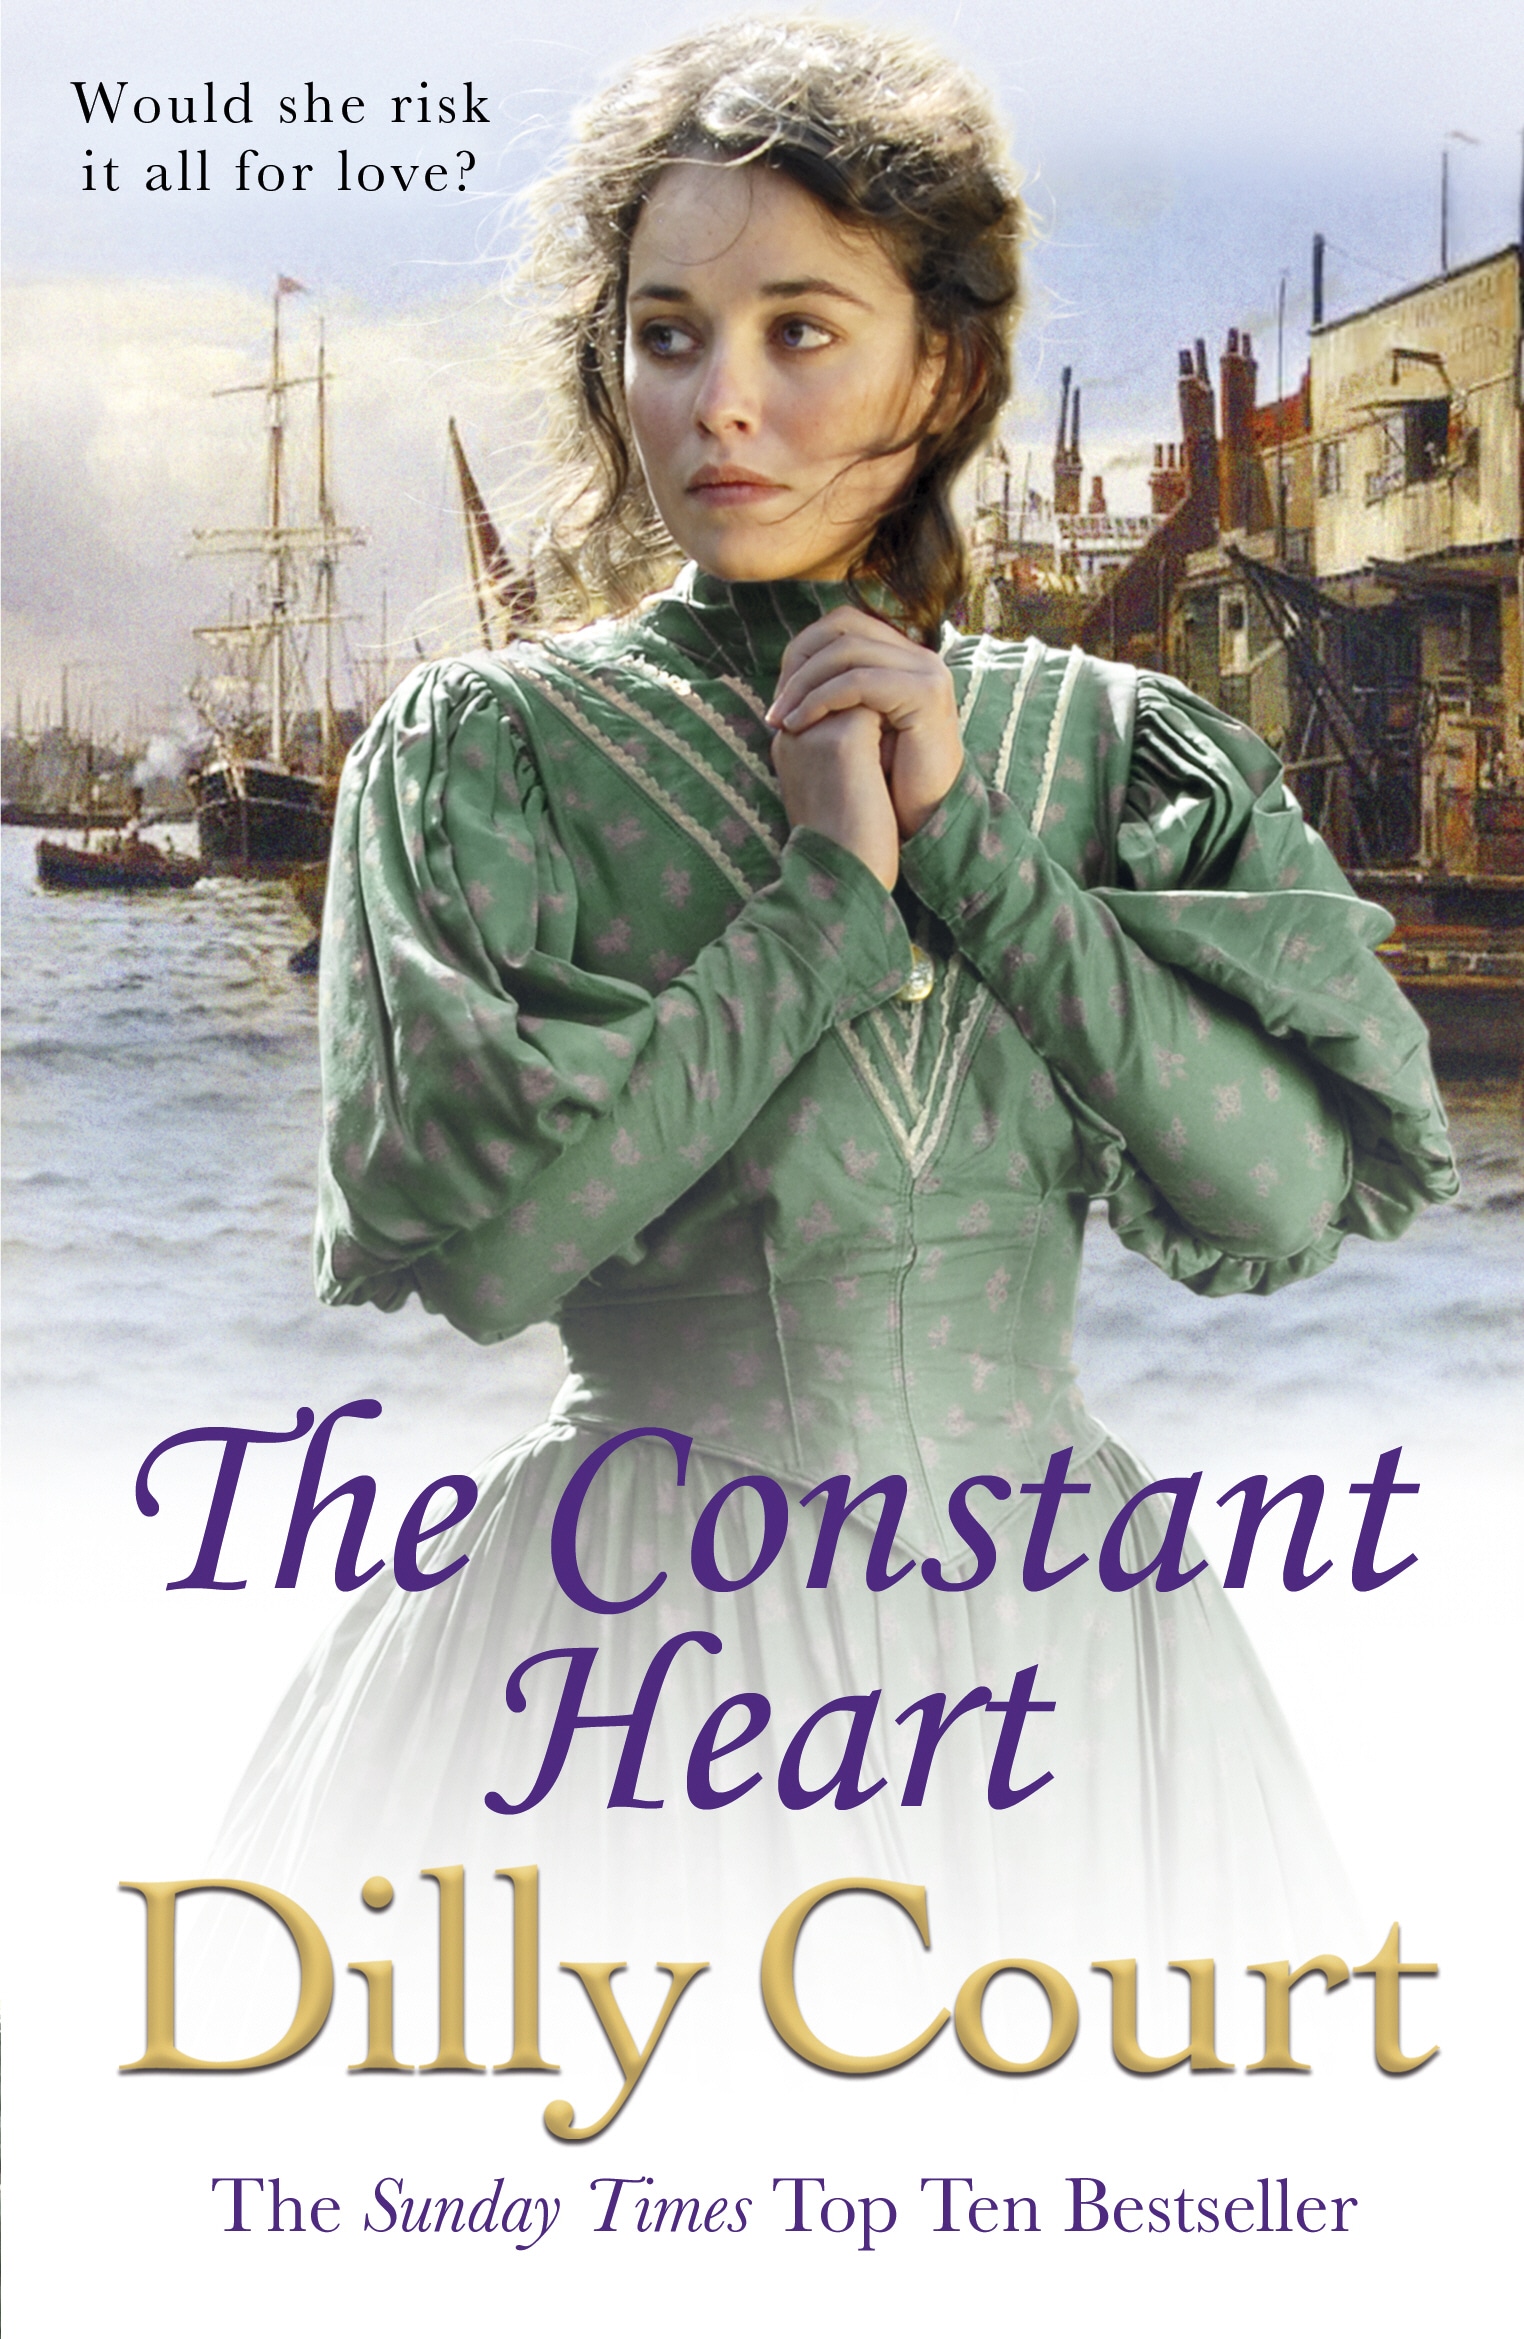 Book “The Constant Heart” by Dilly Court — February 7, 2019